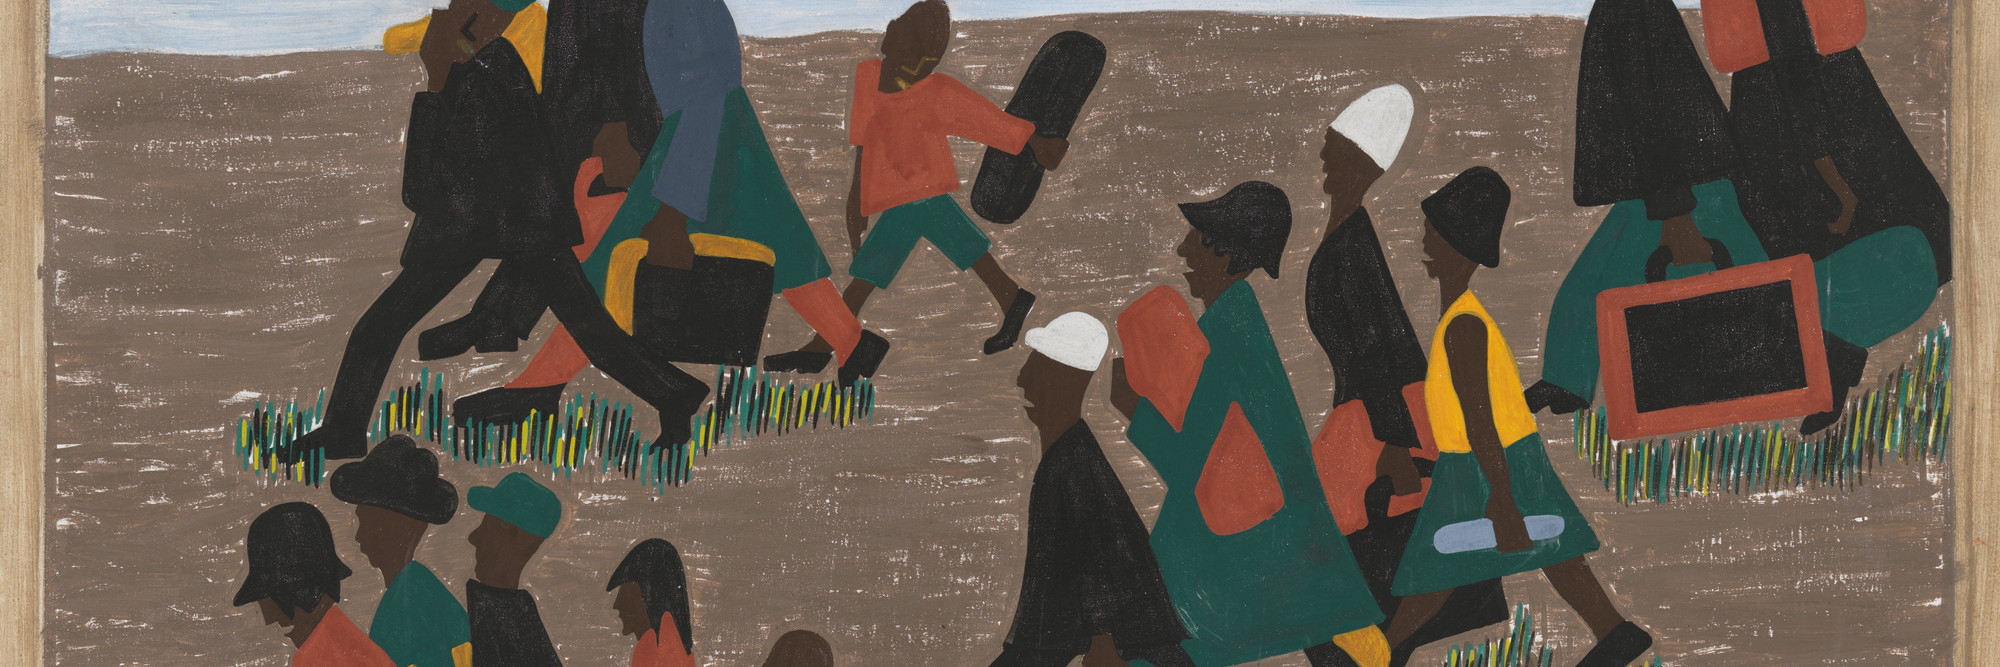 Jacob Lawrence. The Migration Series. 1940-41. Panel 40: The migrants arrived in great numbers. Casein tempera on hardboard, 18 × 12″ (45.7 × 30.5 cm). The Museum of Modern Art, New York. Gift of Mrs. David M. Levy. © 2015 The Jacob and Gwendolyn Knight Lawrence Foundation, Seattle / Artists Rights Society (ARS), New York. Digital image © The Museum of Modern Art/Licensed by SCALA / Art Resource, NY